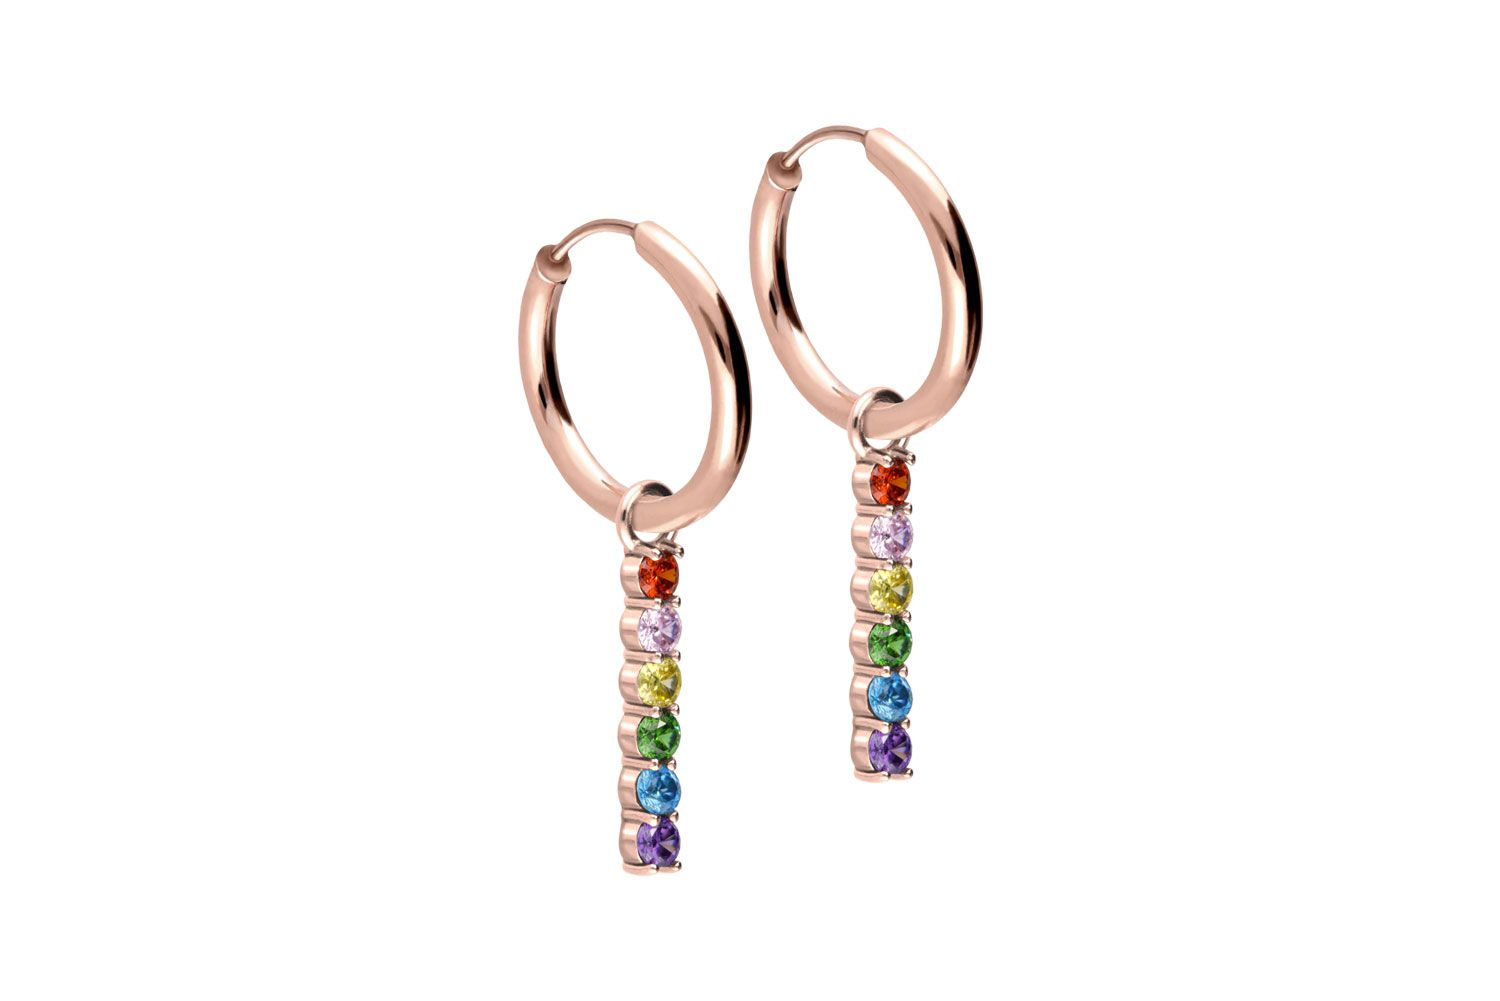 Surgical steel ear clicker creoles MULTICOLORED CRYSTAL BAR